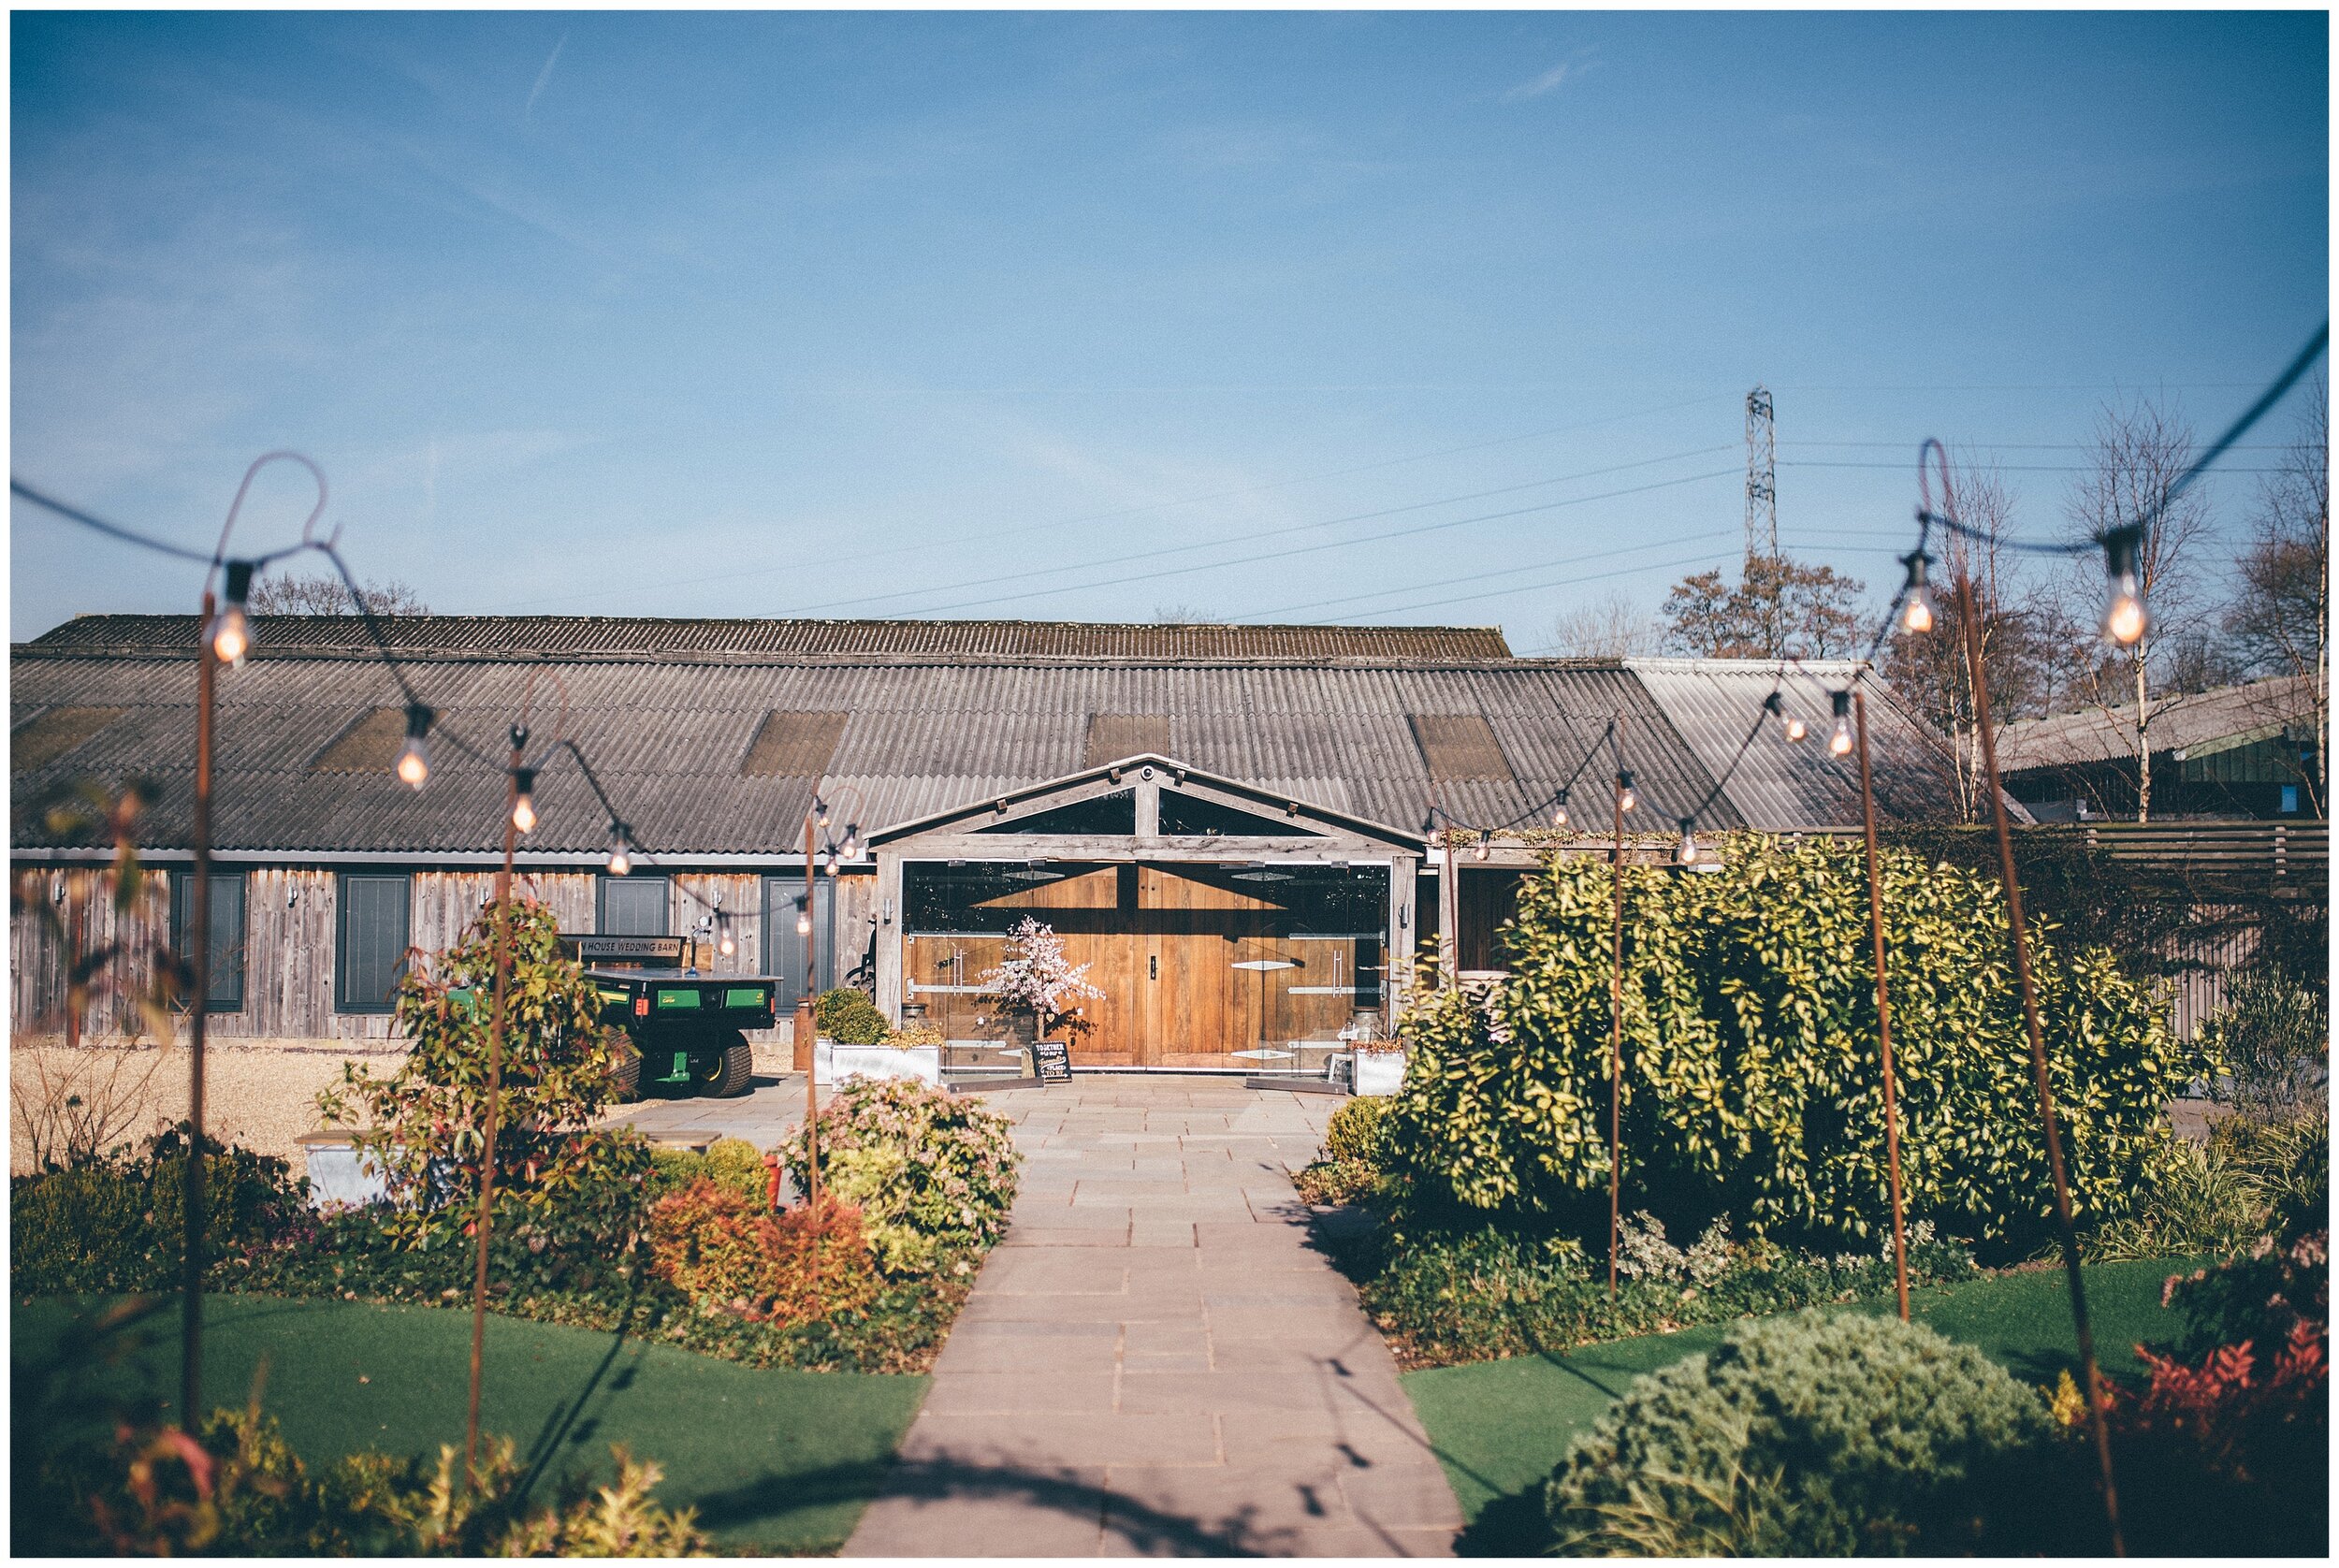 The entrance of Owen House Wedding Barn in Cheshire.